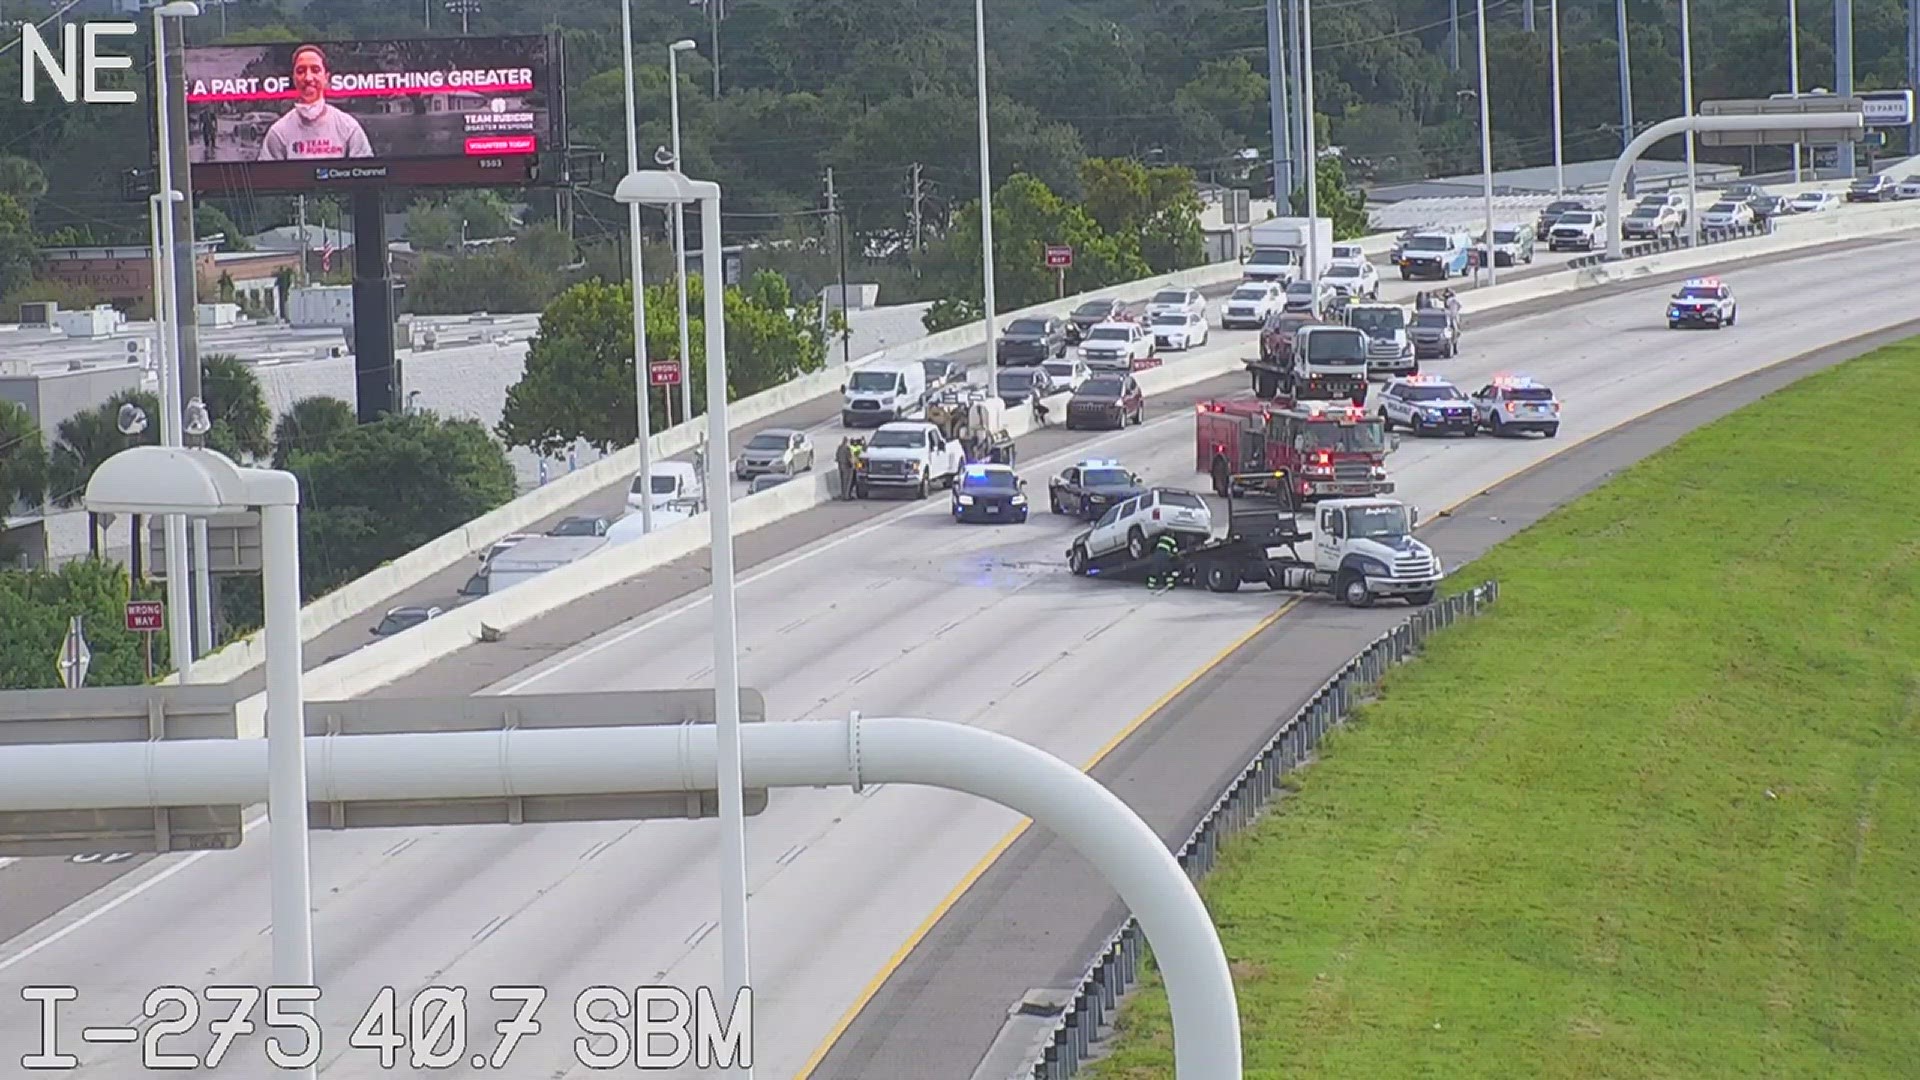 Traffic was diverted off southbound I-275 at Dale Mabry Highway.